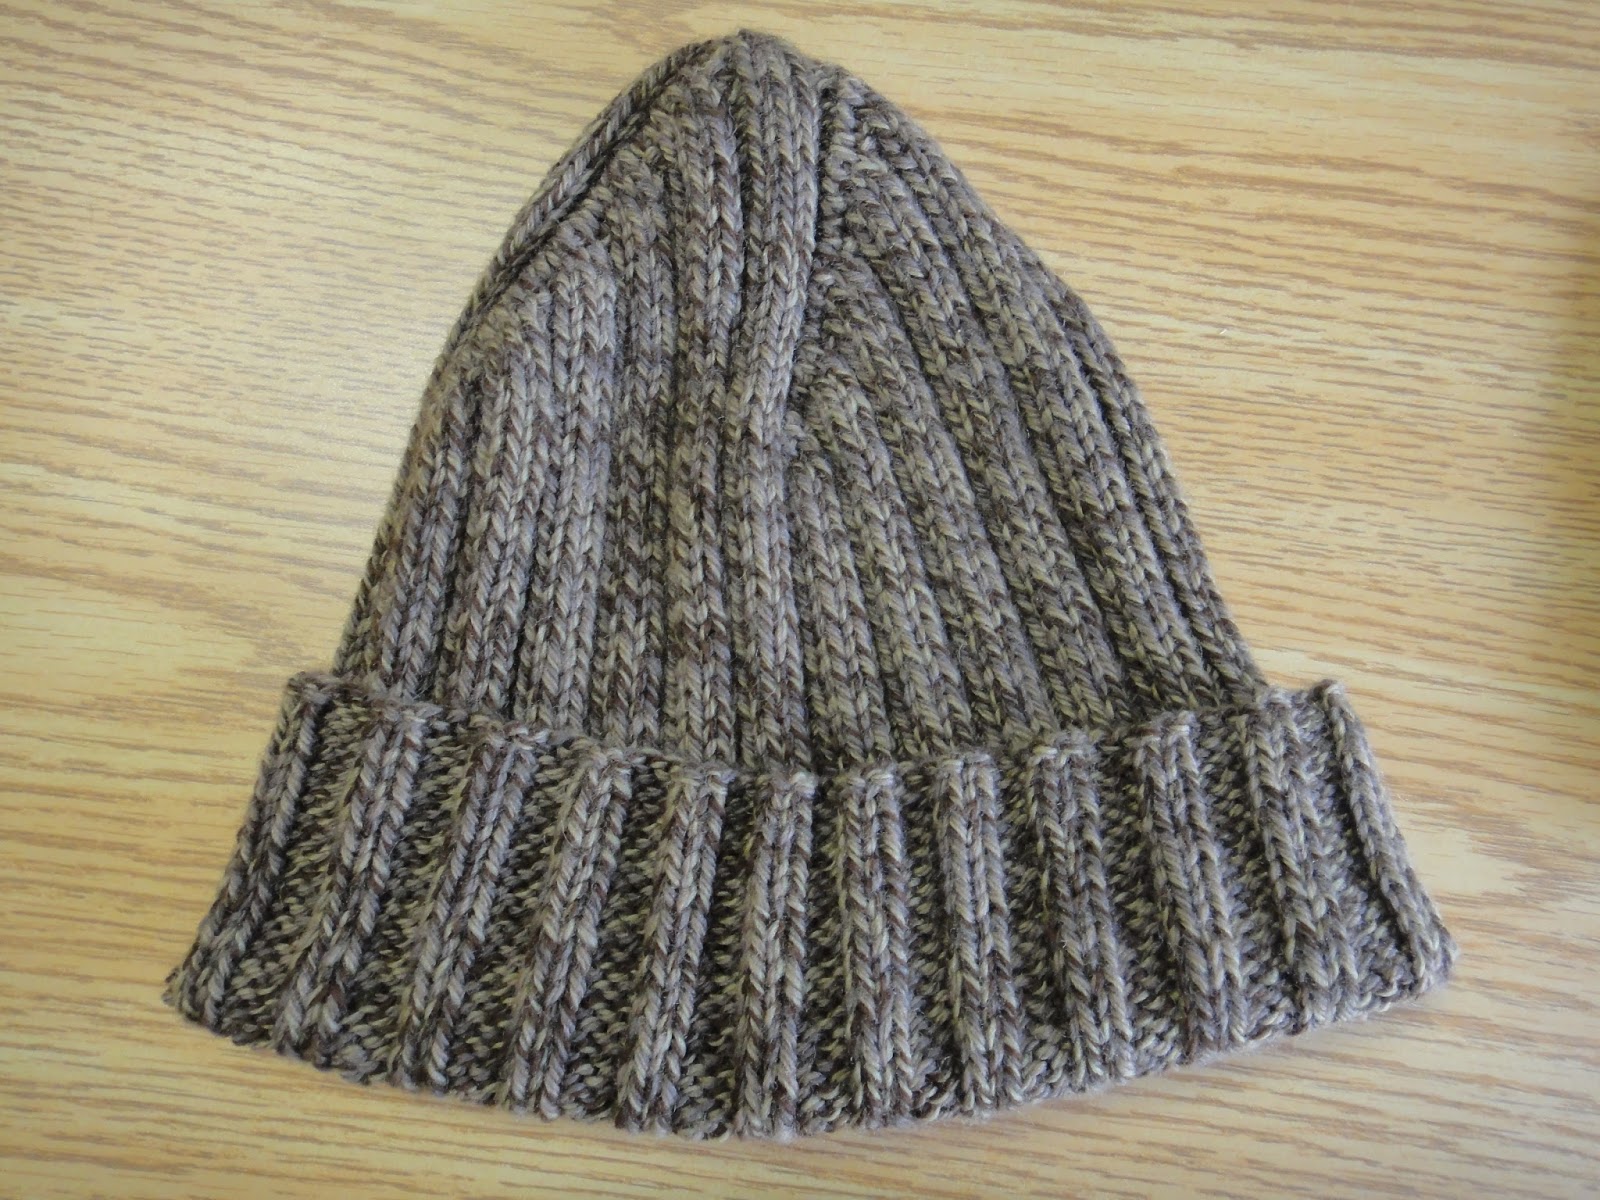 Serenity Knits: Jacques Cousteau Hat